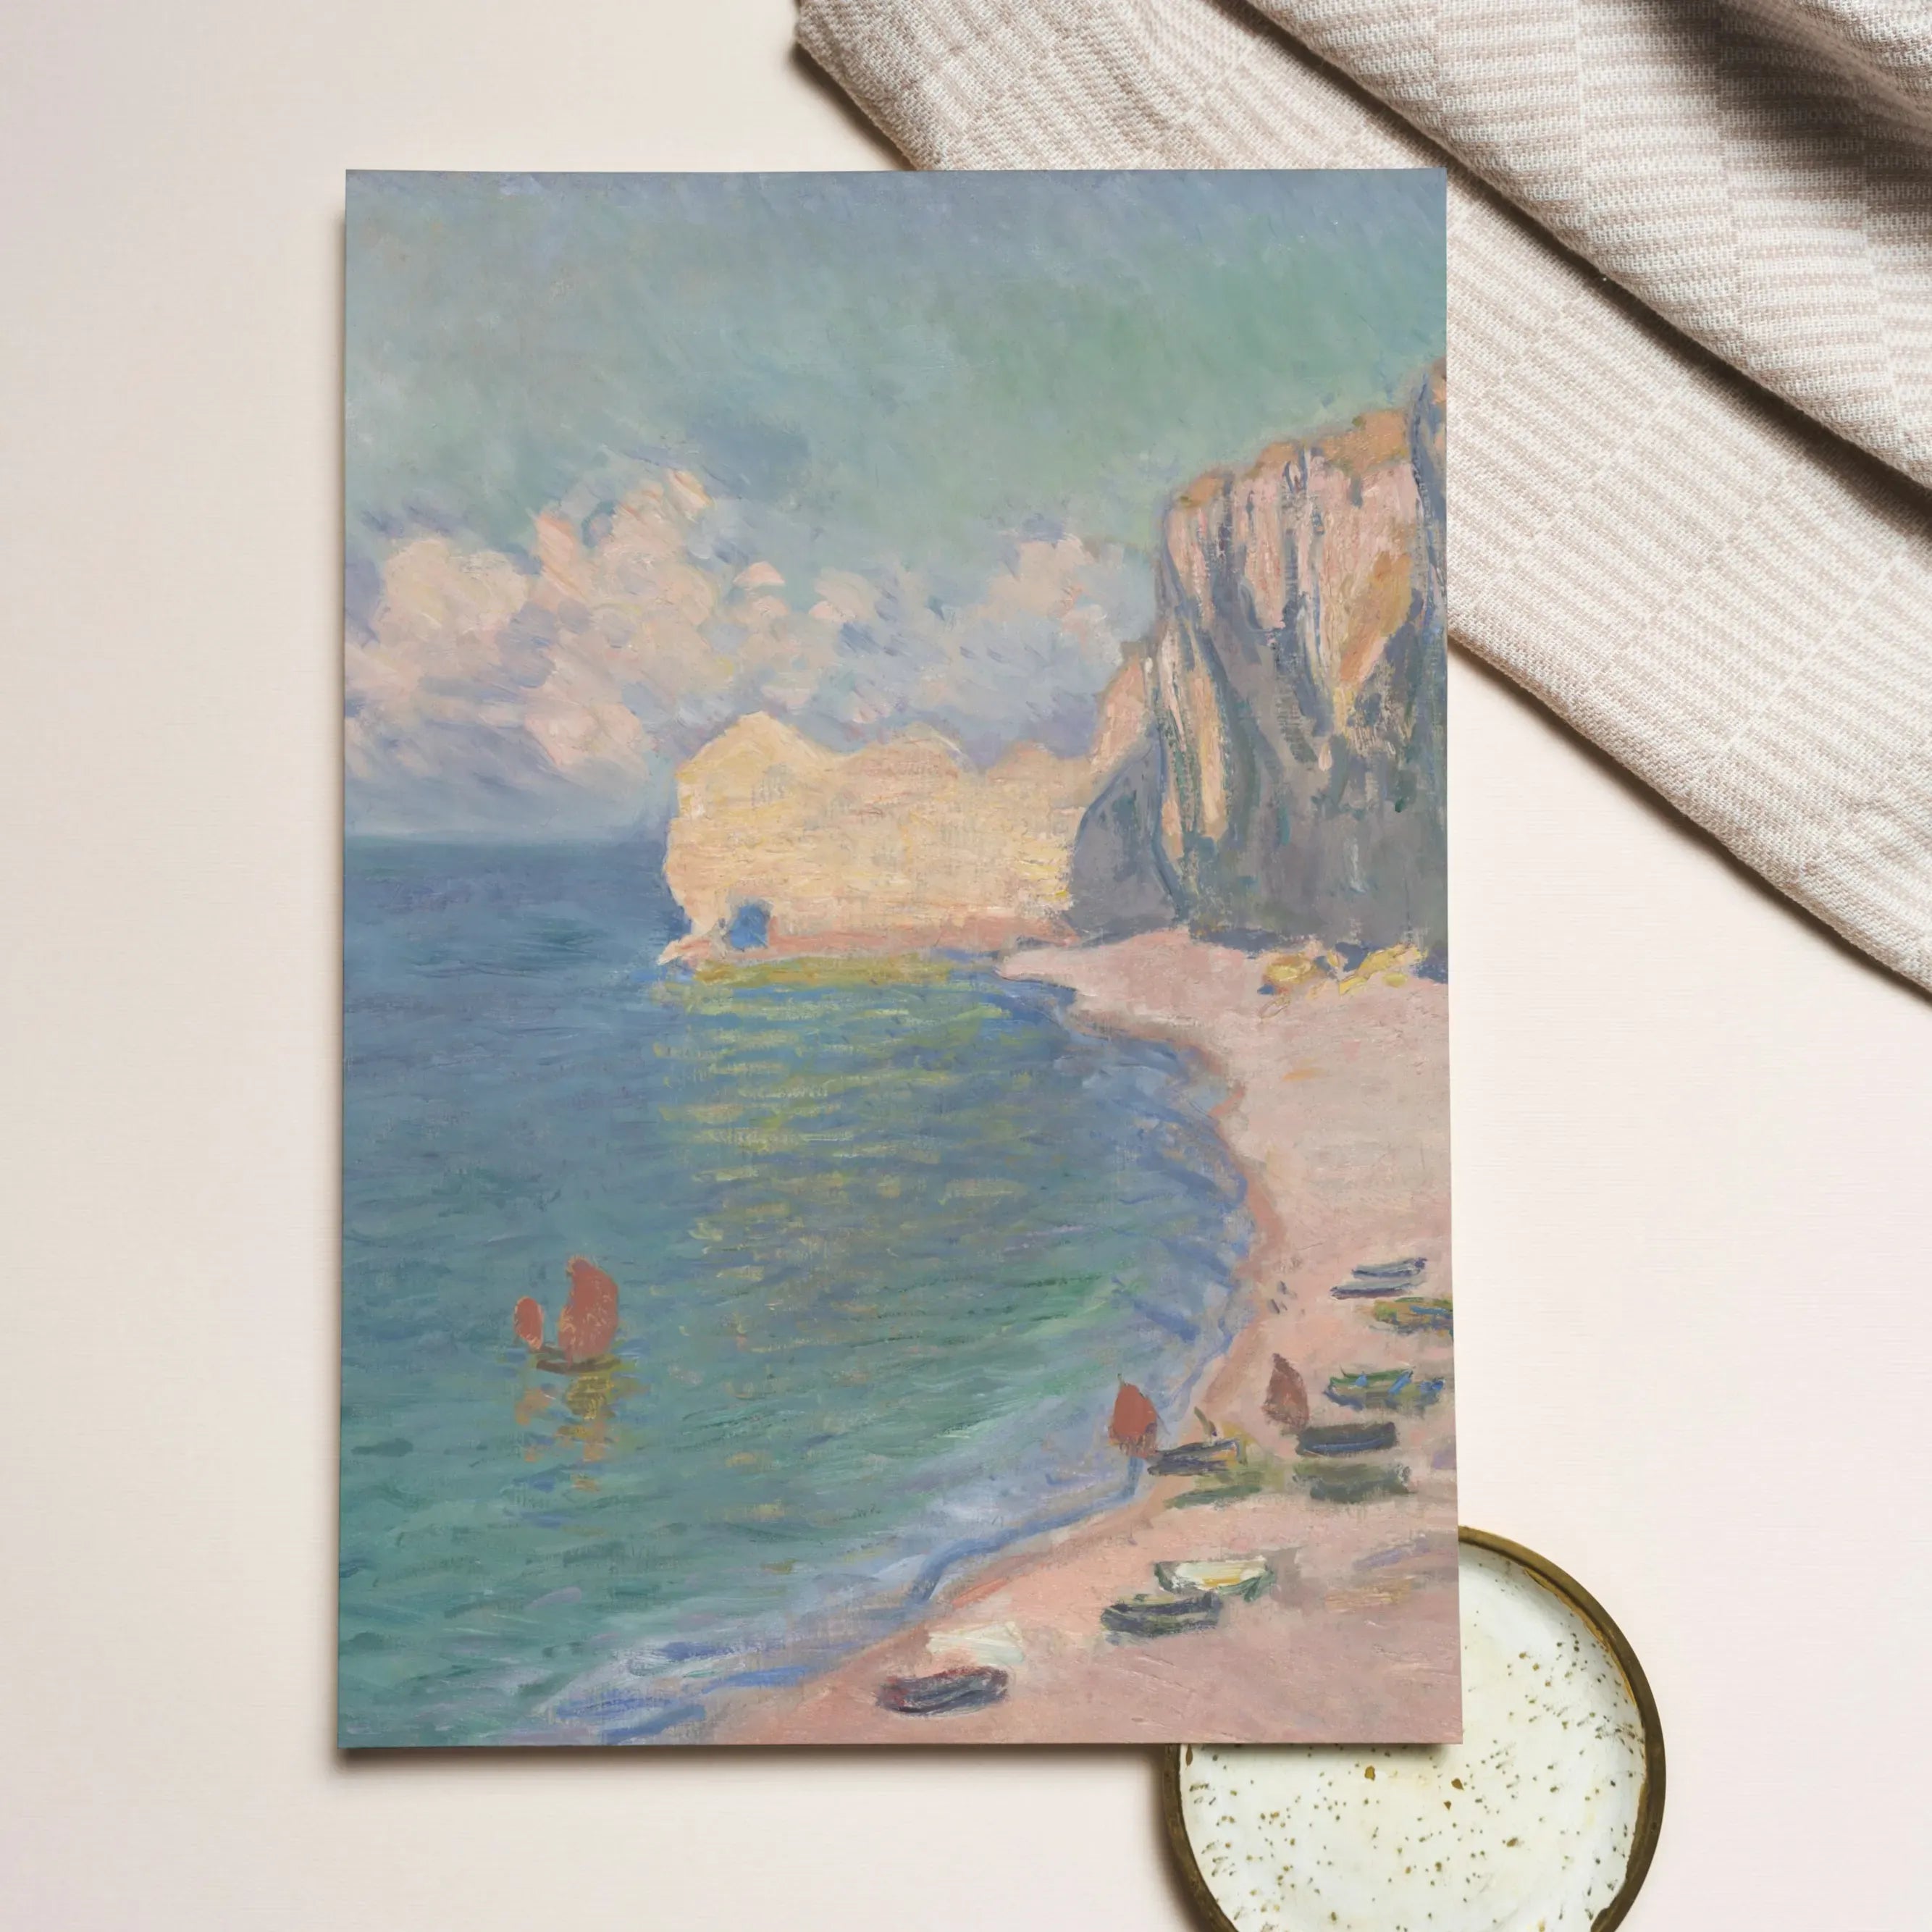 étretat By Claude Monet Greeting Card - Greeting & Note Cards - Aesthetic Art